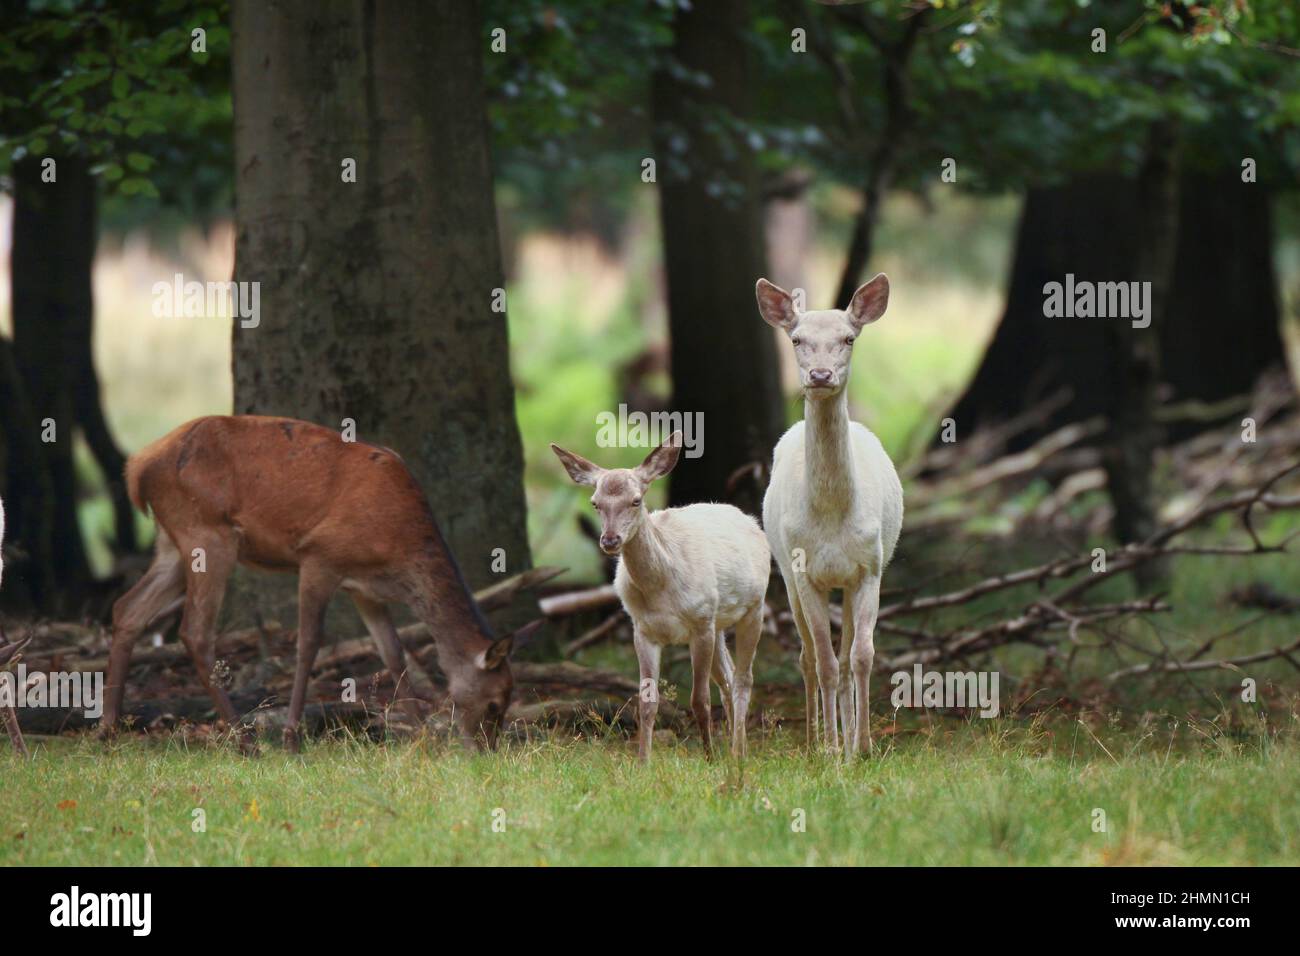 red deer (Cervus elaphus), white hind with fawn, albinos, Germany Stock Photo